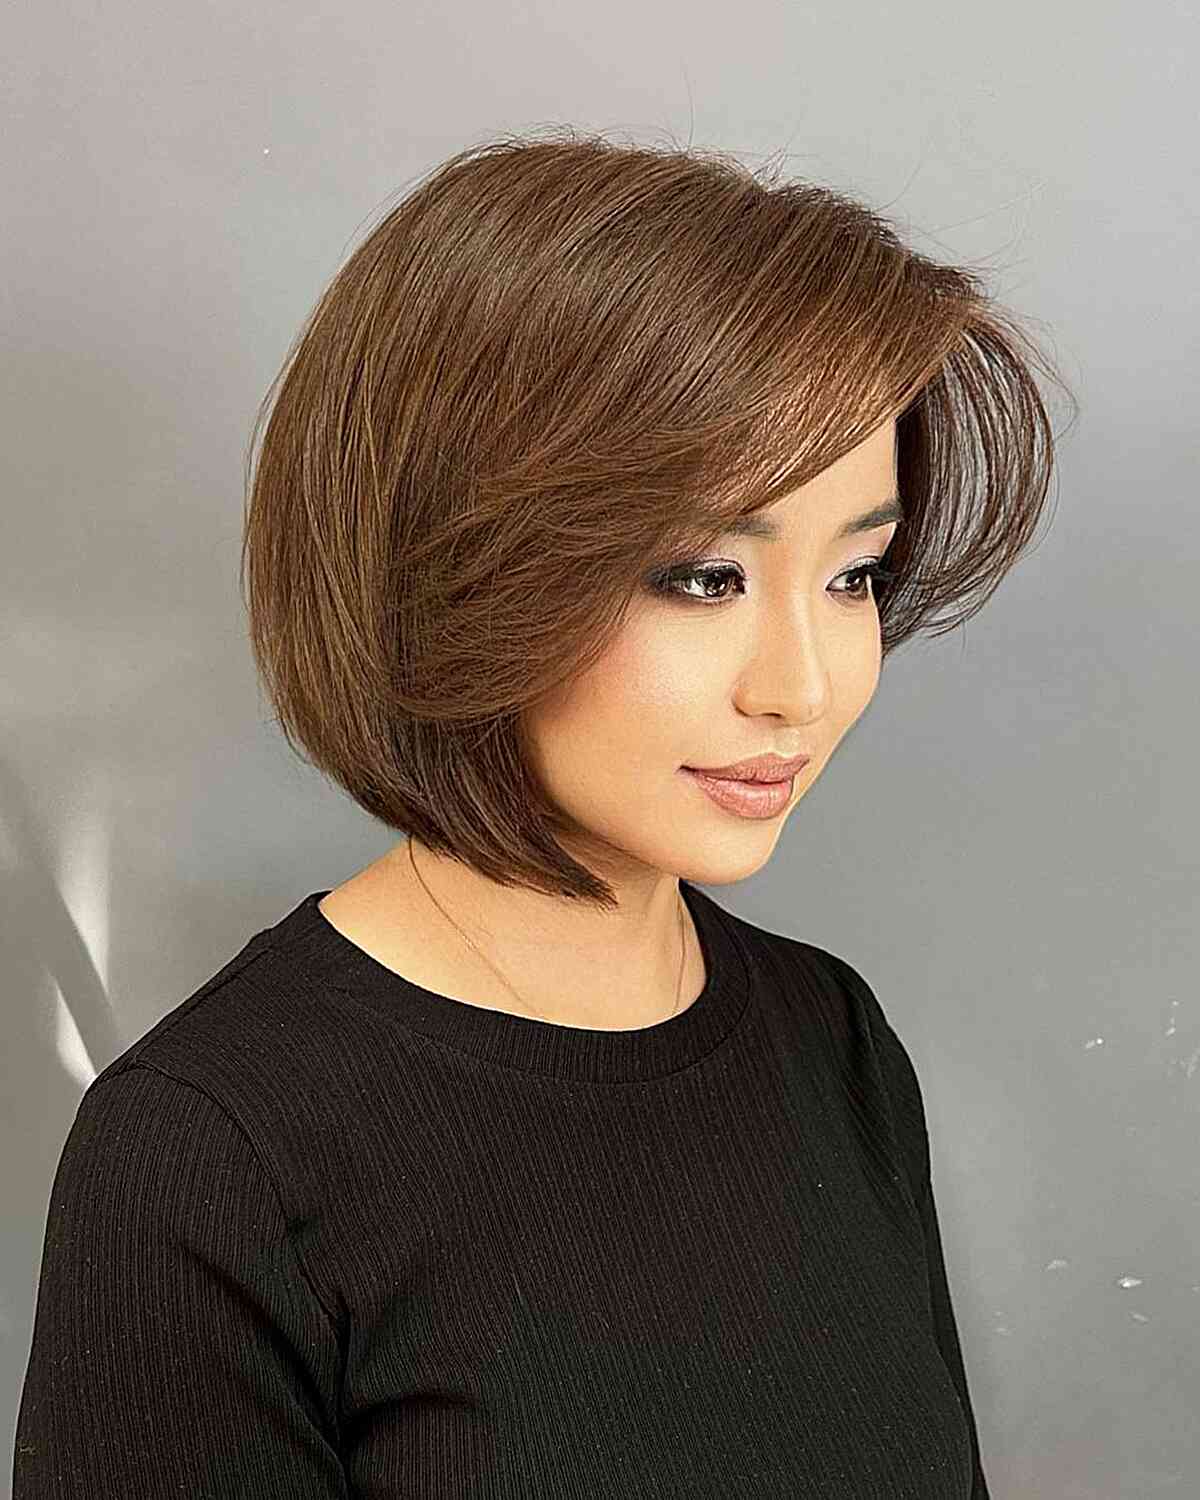 The Top 18 Short Haircuts For Asian Girls Trending in 2023